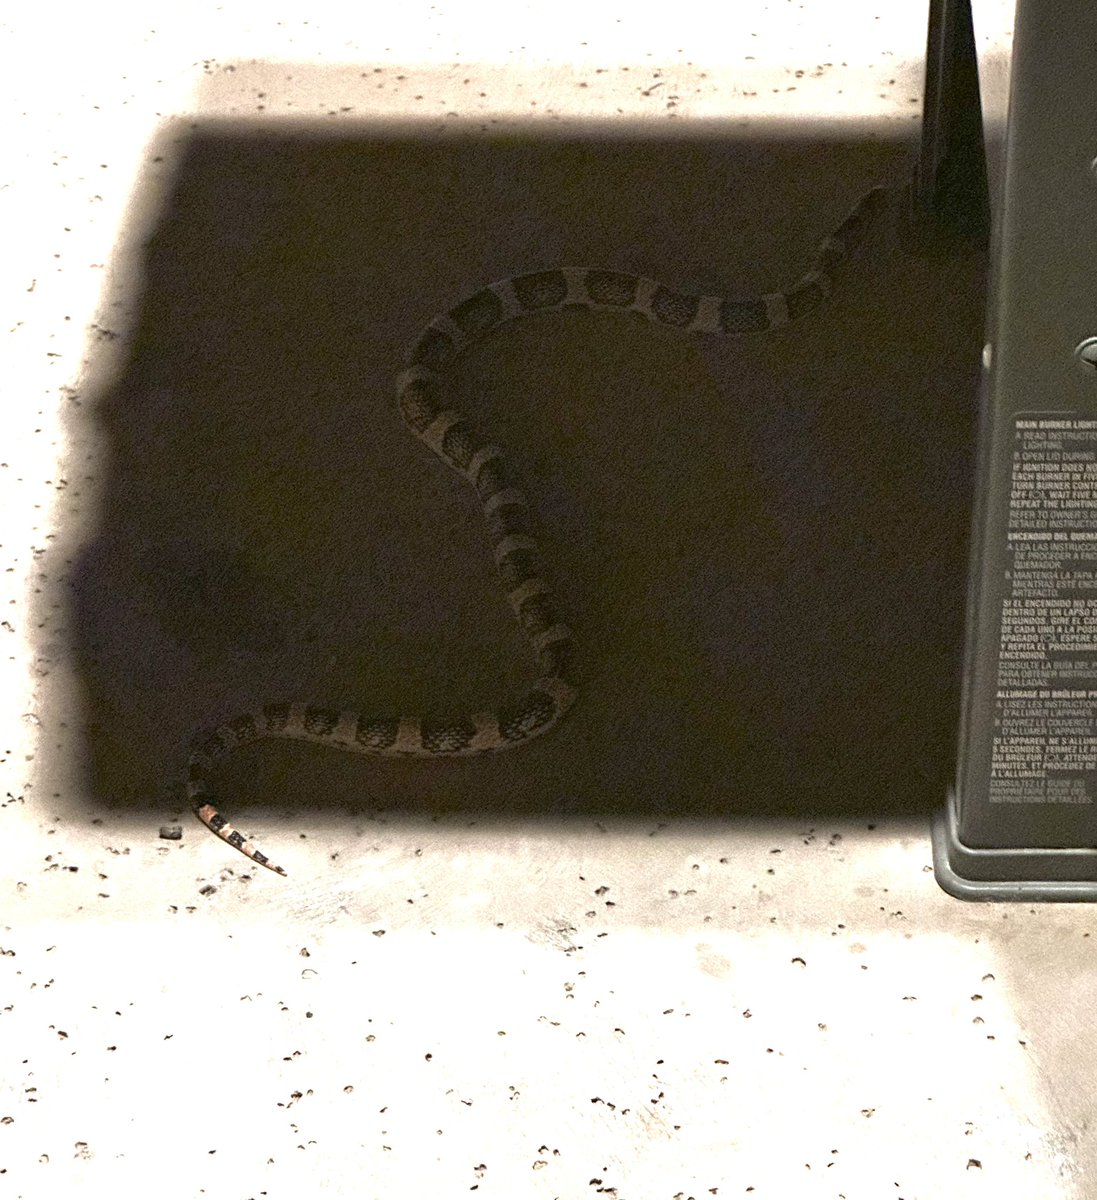 I LOVE living in Arizona but I HATE snakes! I literally couldn’t sleep all night because of this guy…. He was outside, laying right next to the grill last night 😳 🐍